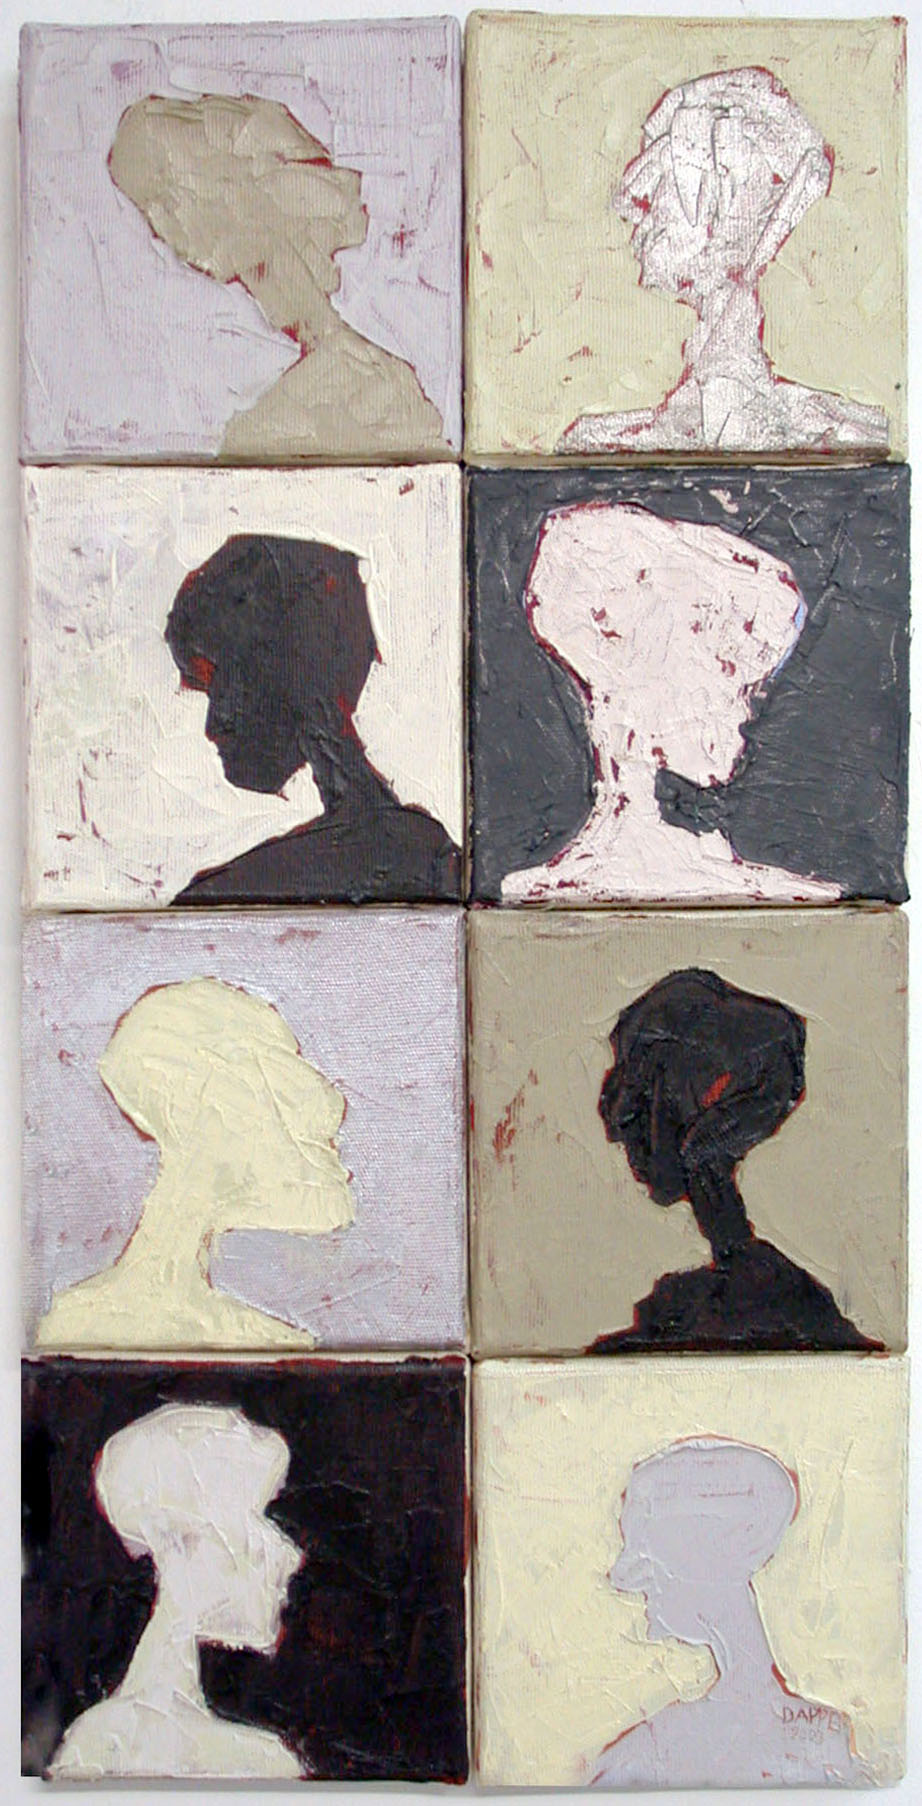 Profile painting by contemporary visual artist Hester van Dapperen